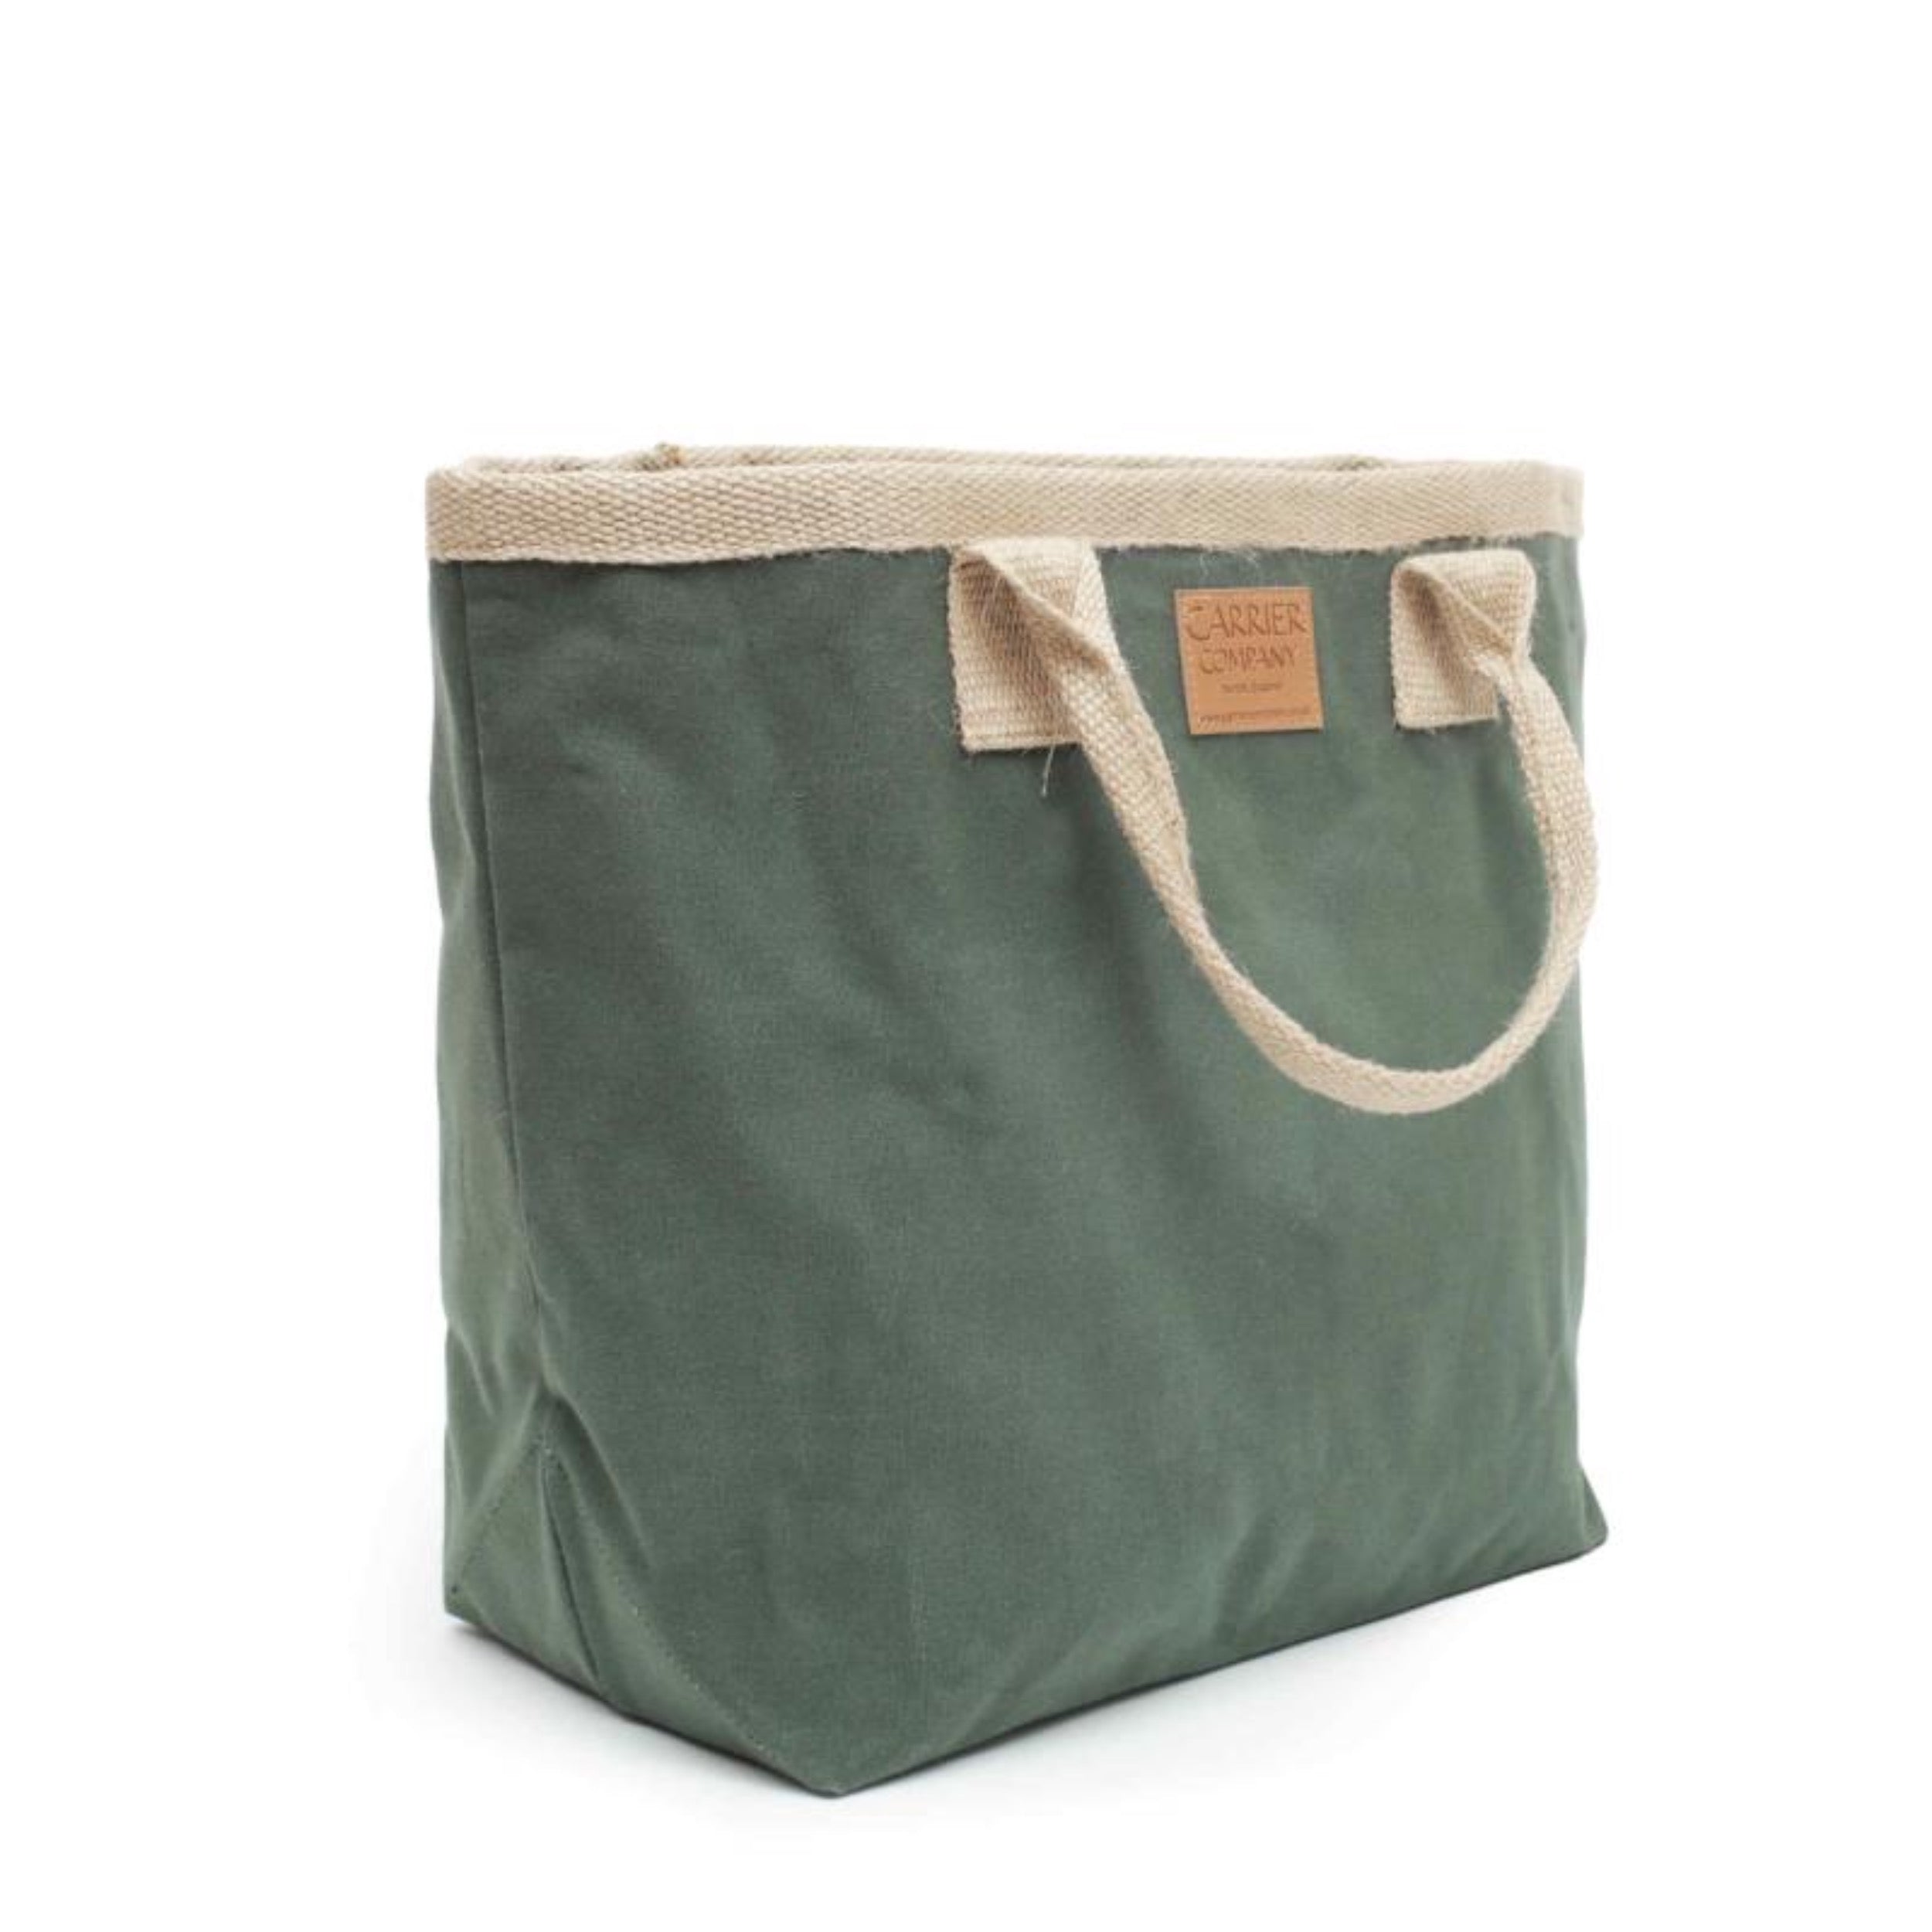 Carrier Company Sturdy Bag in Spruce Green